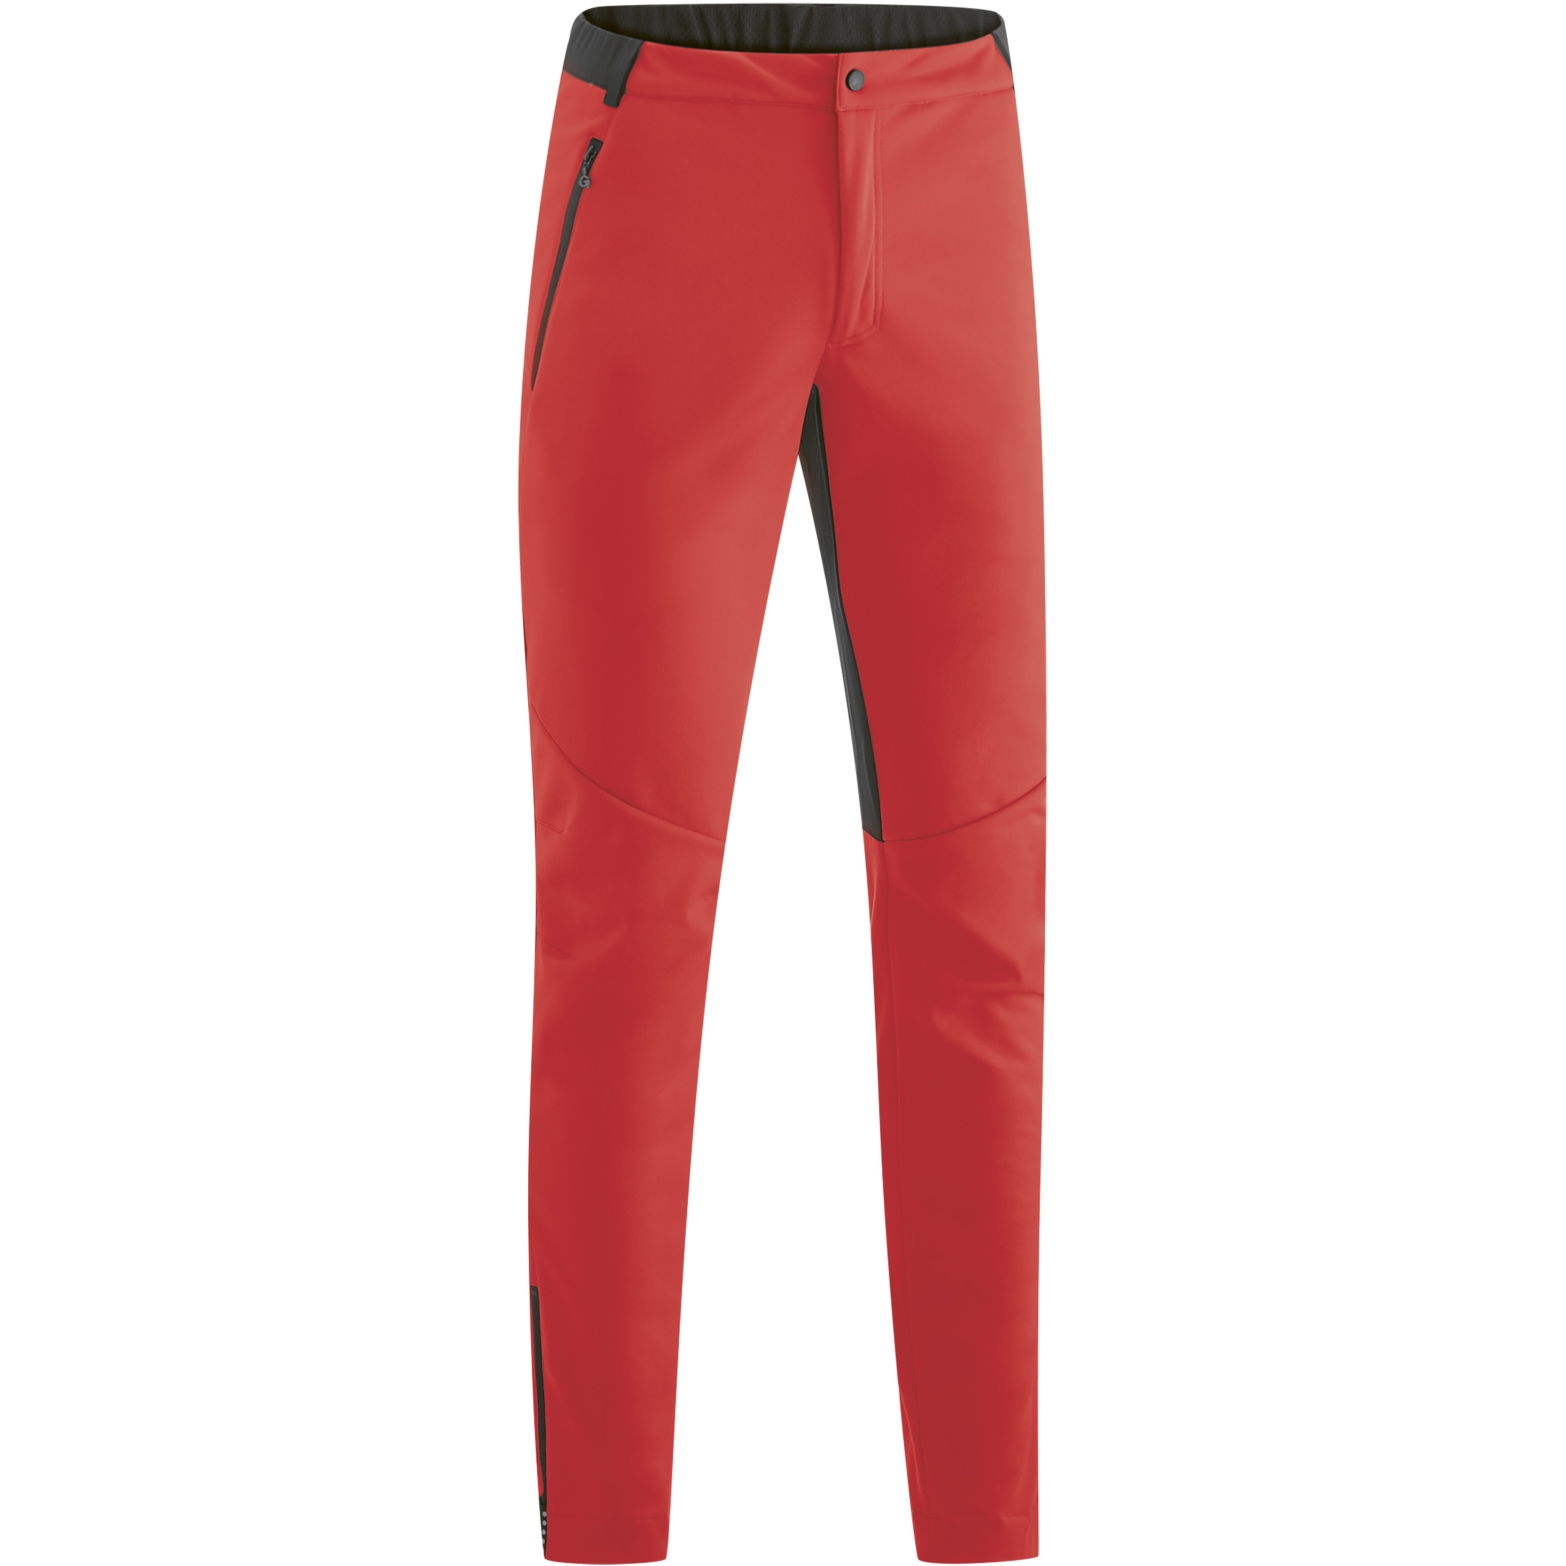 Image of Gonso Odeon Softshell Cycling Pants Men - High Risk Red